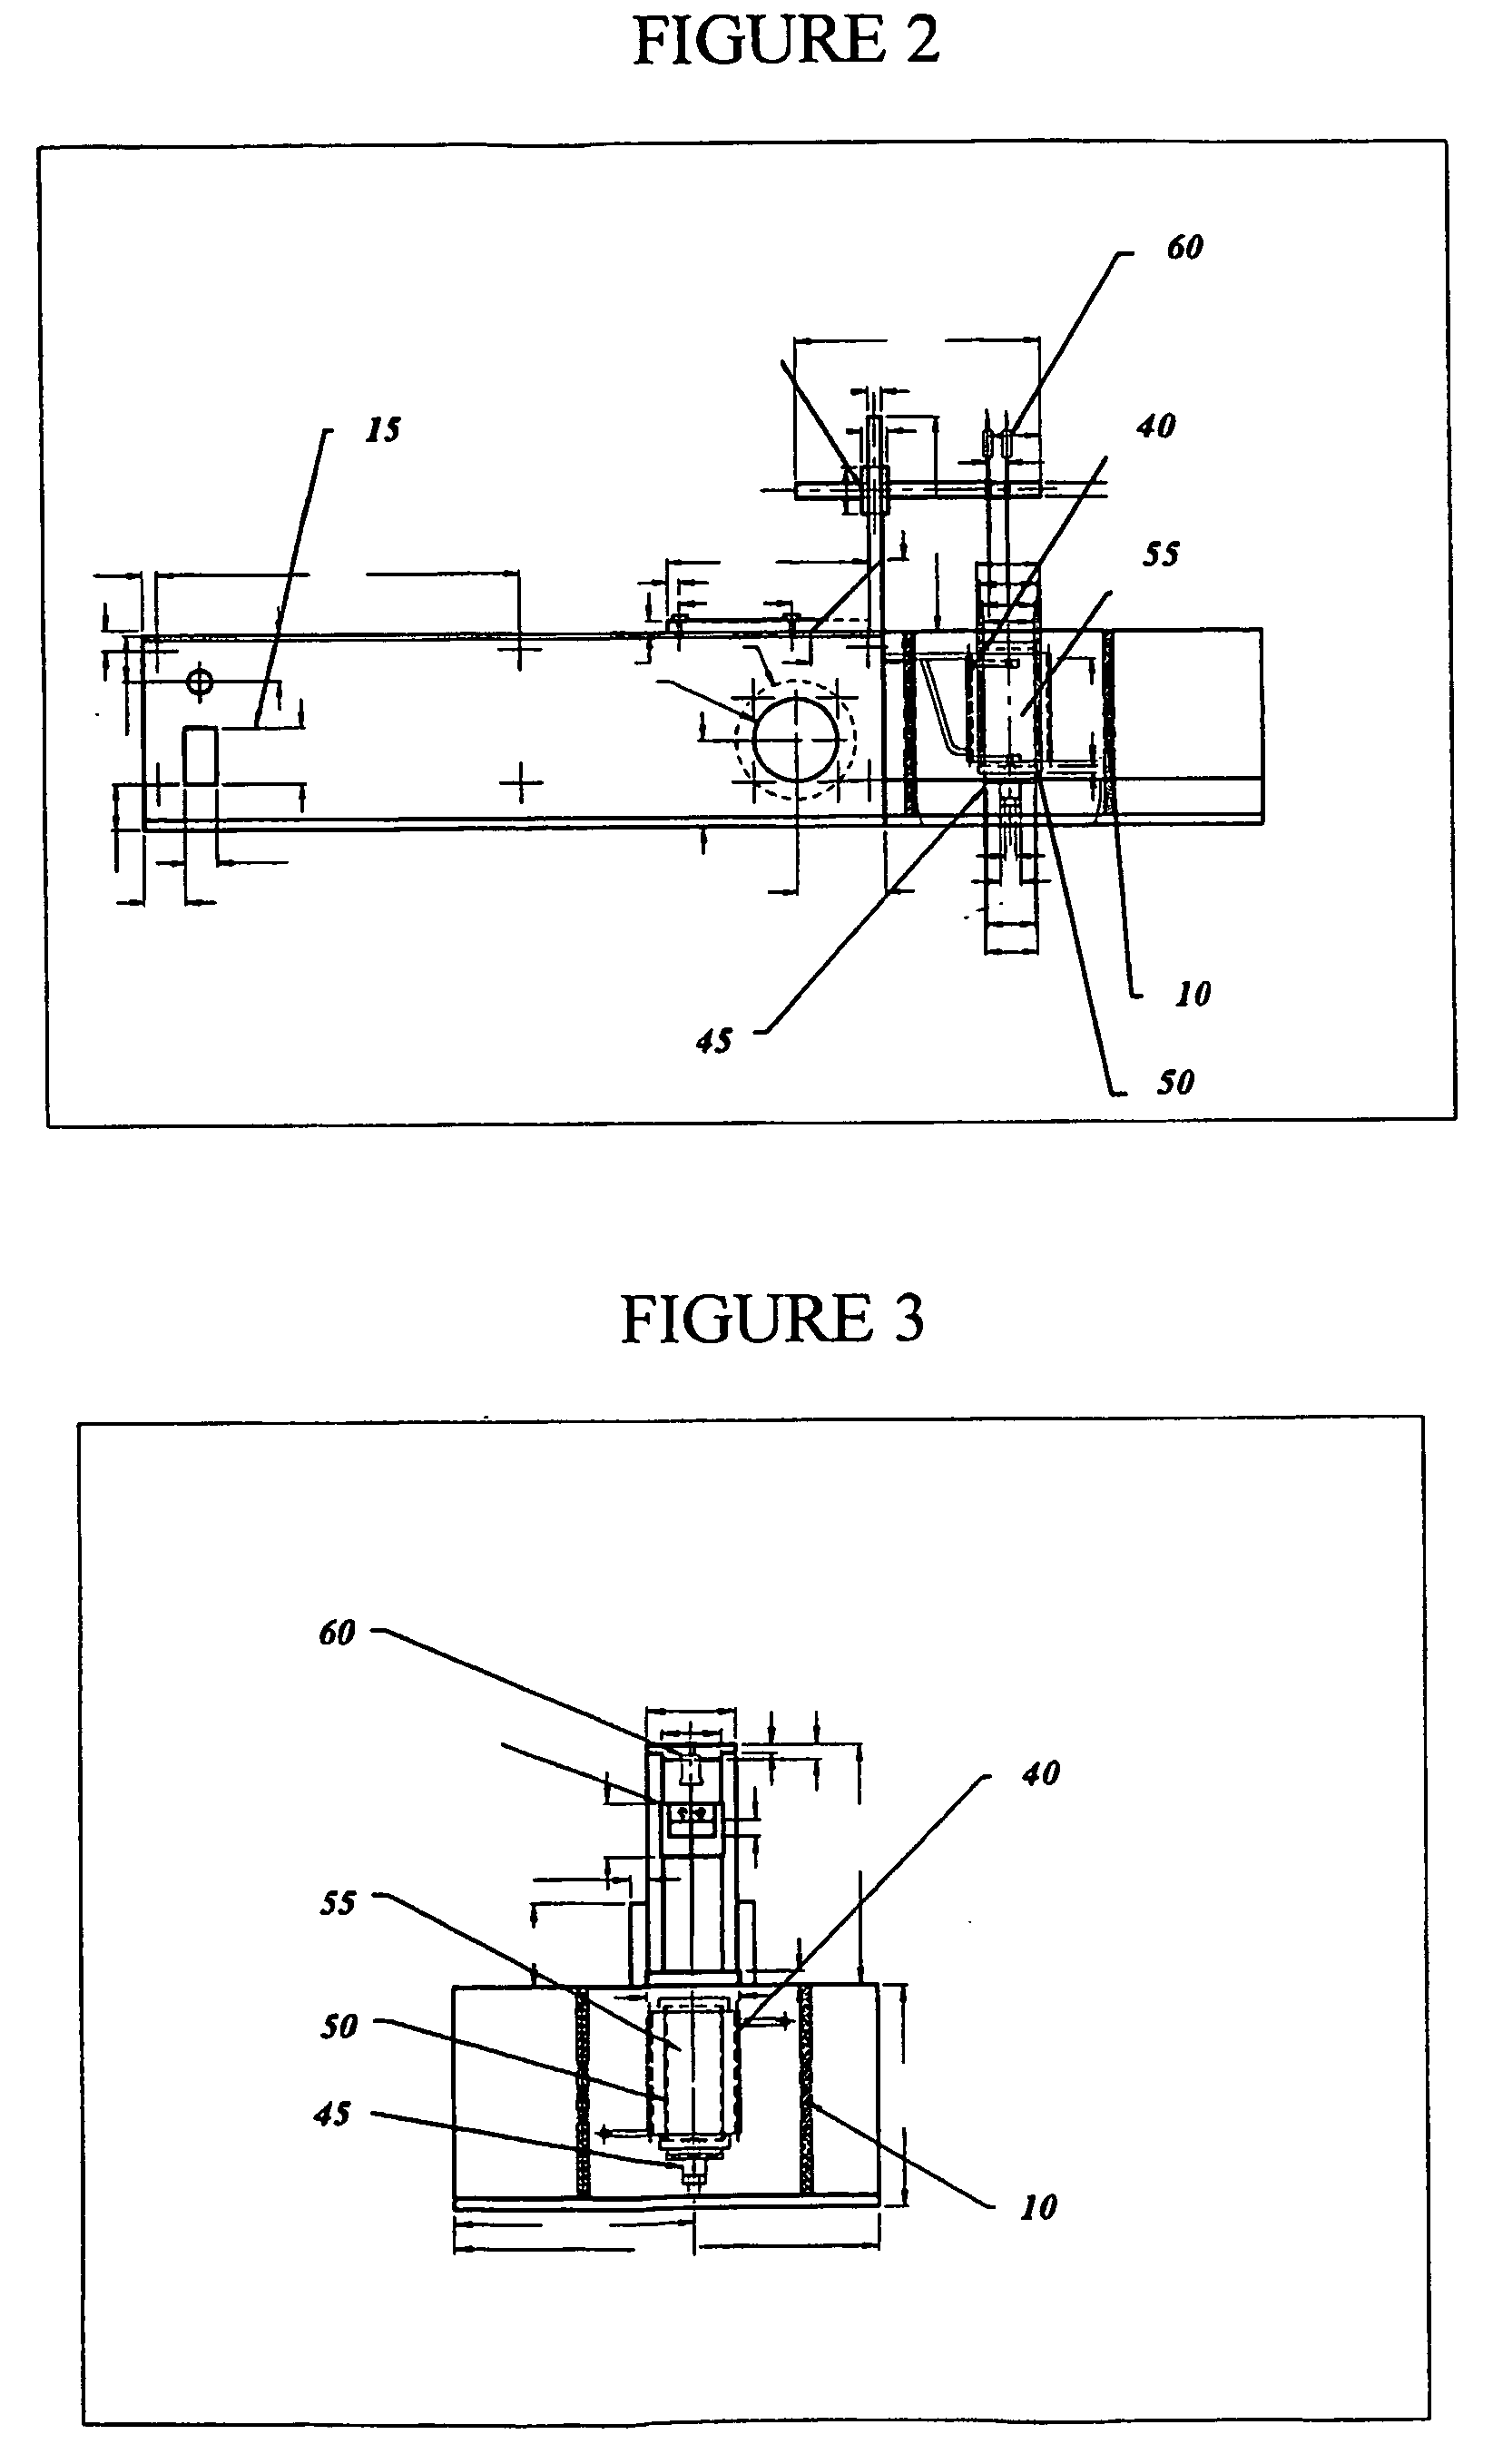 Method and apparatus for universal metallurgical simulation and analysis